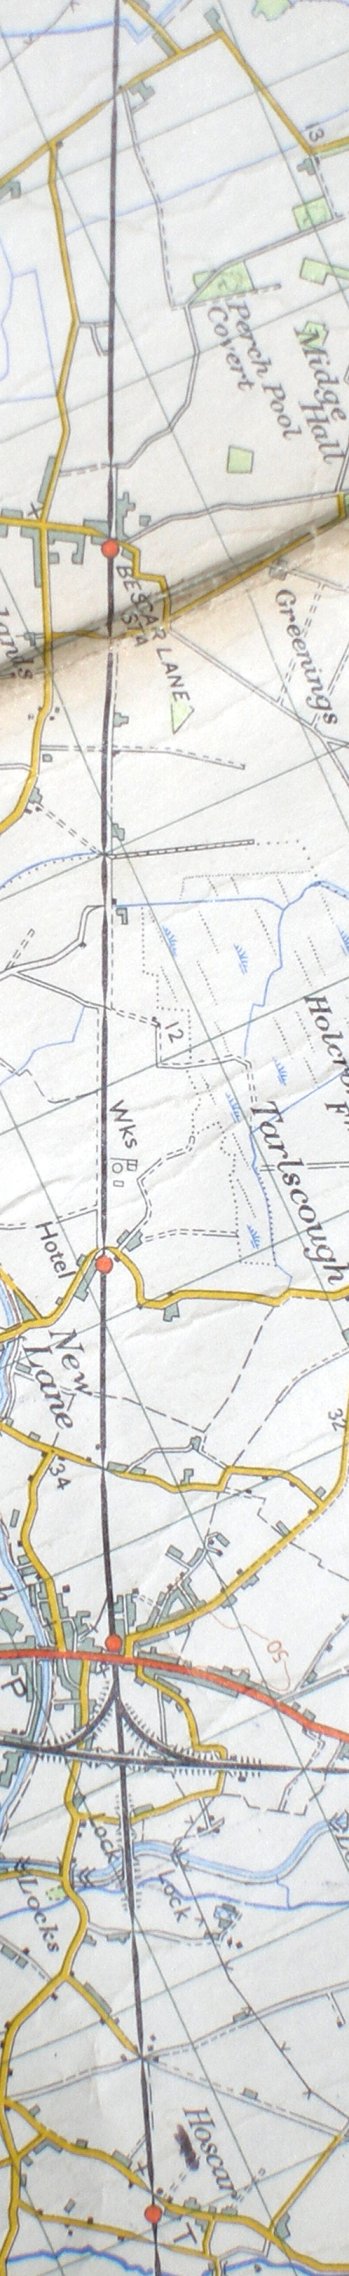 Section from the Ordnance Survey map showing L&YR railway line from Bescar Lane to Burscough Bridge Junction